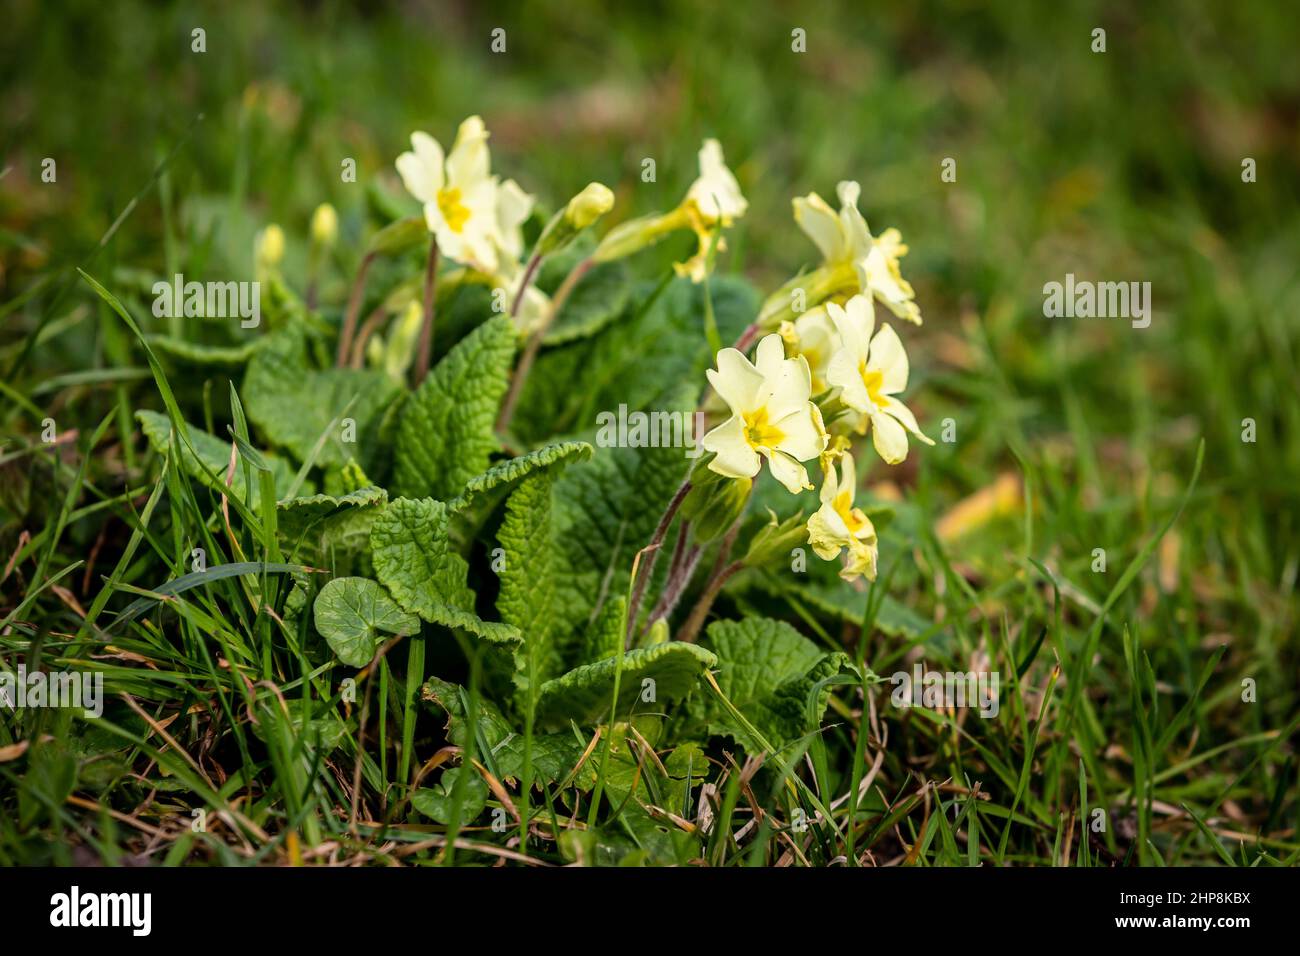 Common Primrose Flowers in Bloom in Early Spring Stock Photo